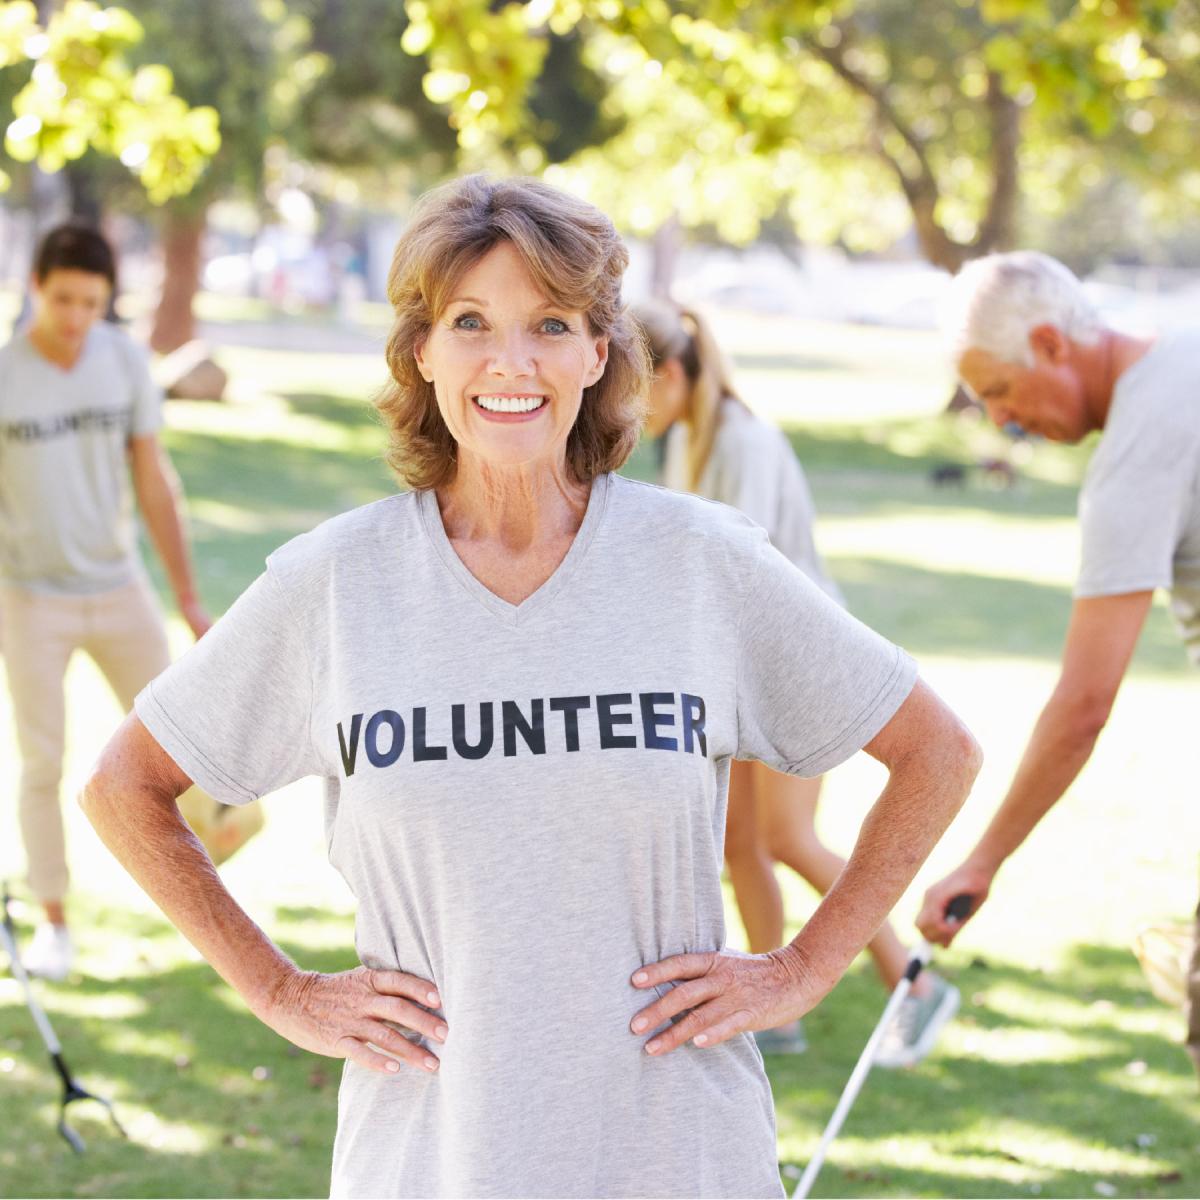 Volunteer smiling with hands on their hips